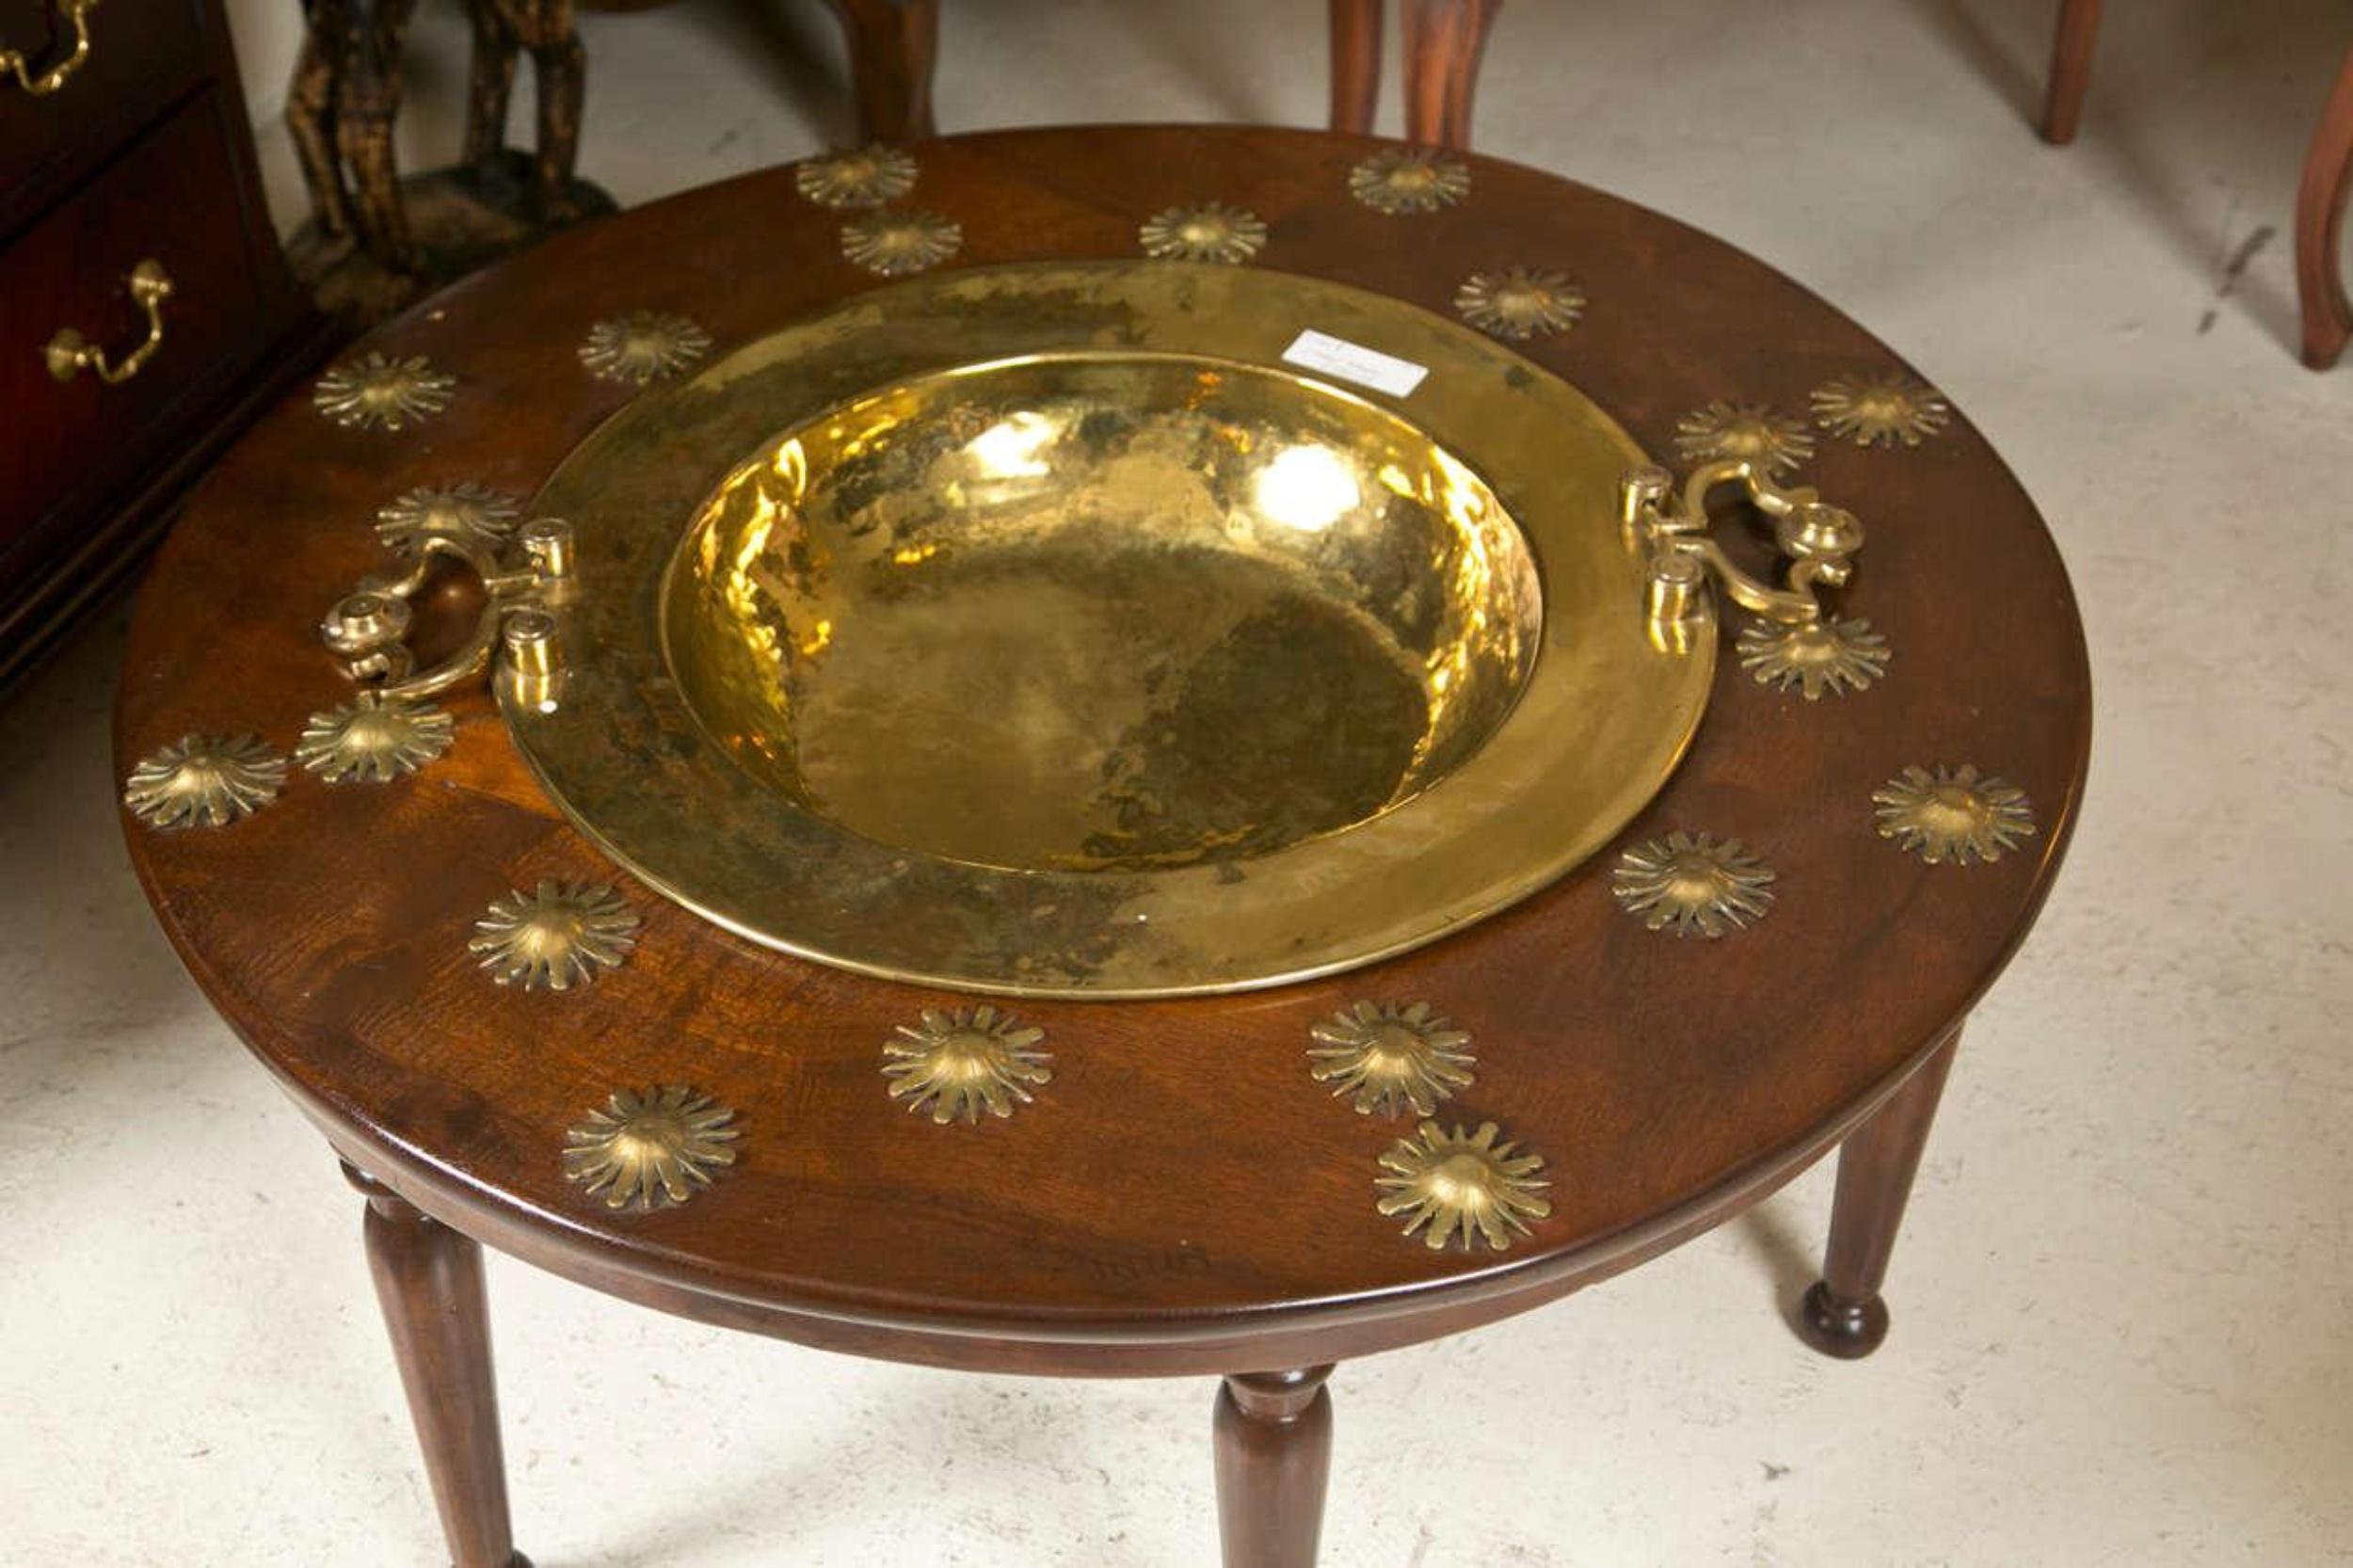 Fine late 19th century Empire style Brazier. The walnut wood tapering feet leading to a circular bronze mounted table top supporting a copper twin handled brazier.